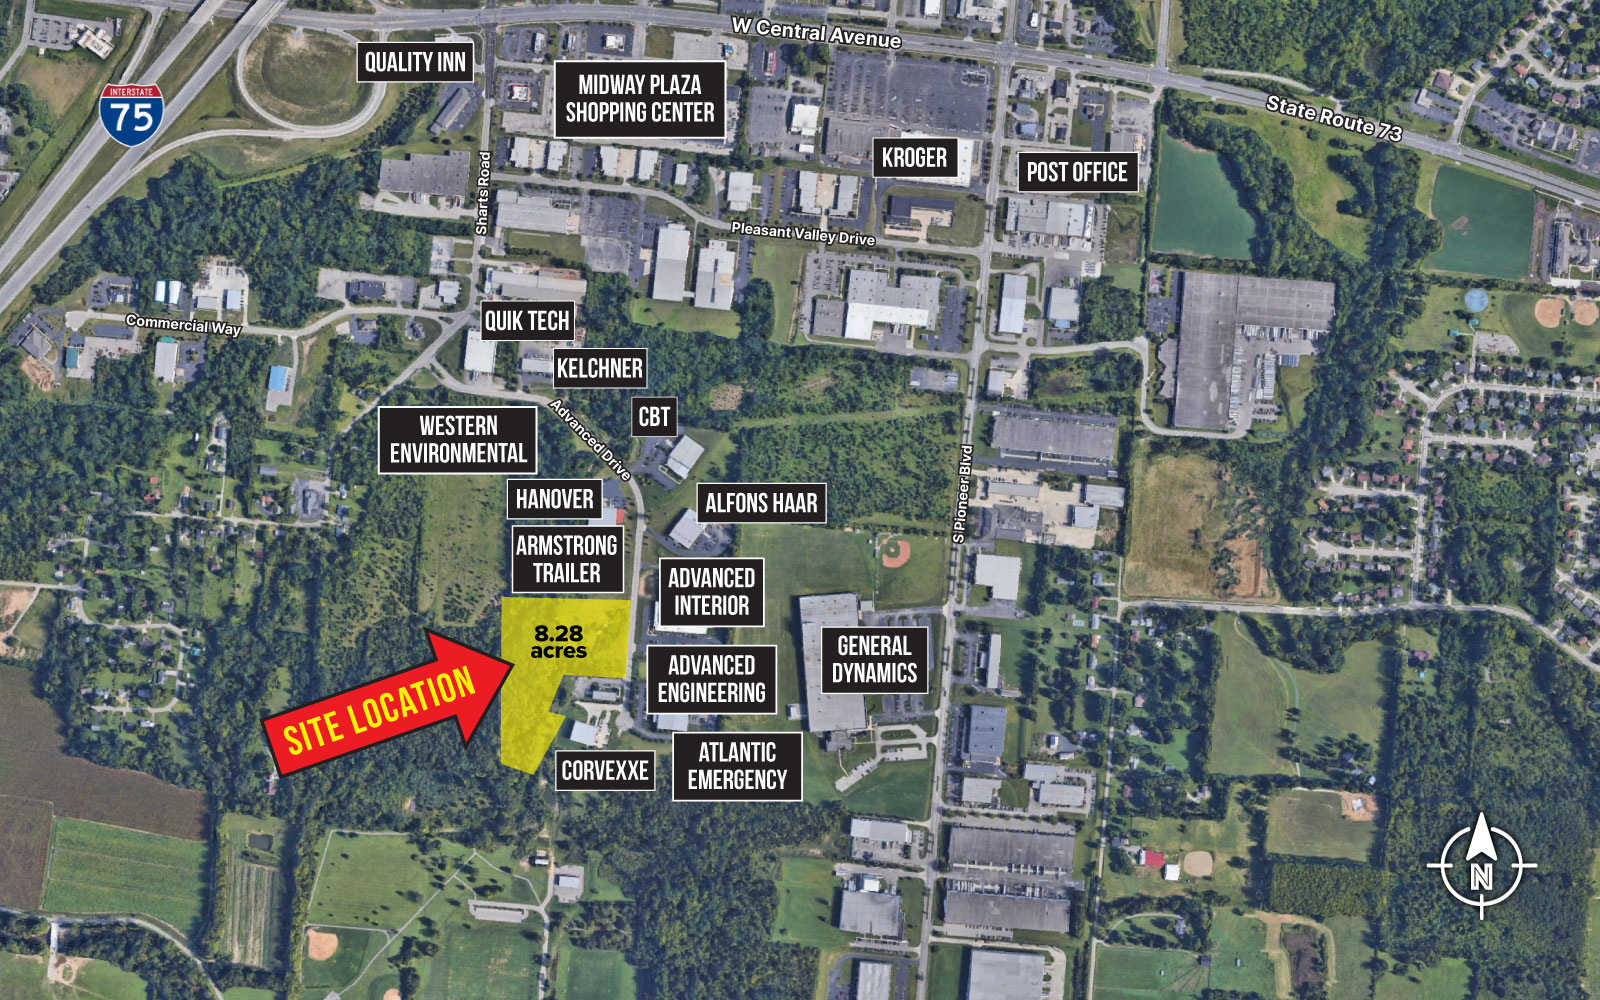 Stolz Industrial Park area map